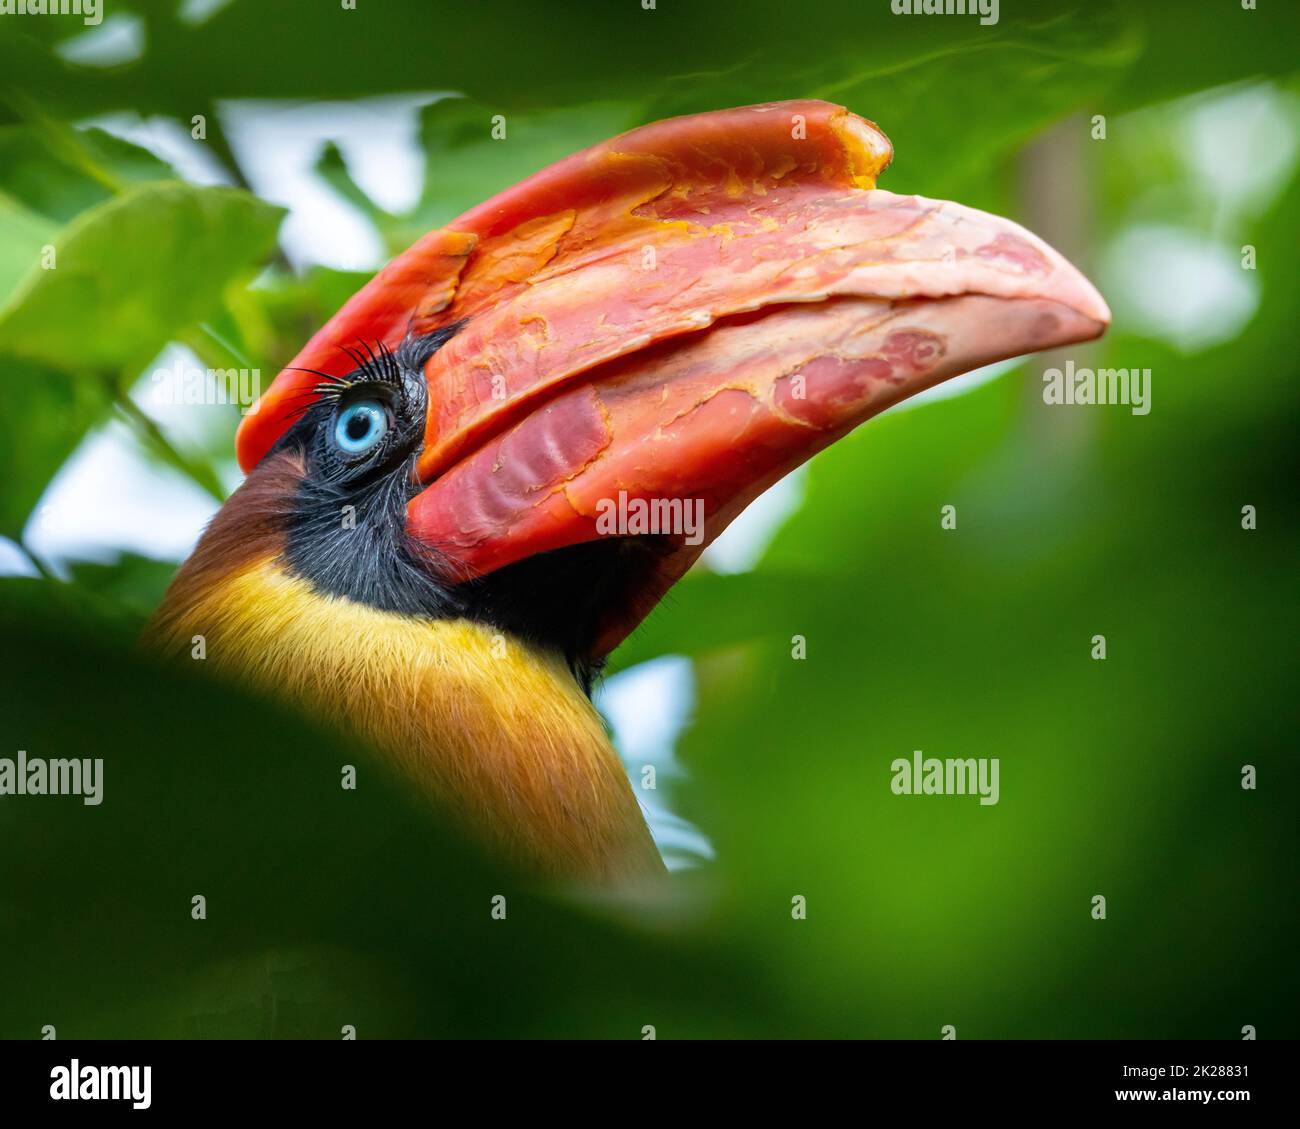 Close-up of a Rufous Hornbill - one of the largest birds in found in the rainforests of Asia. Stock Photo